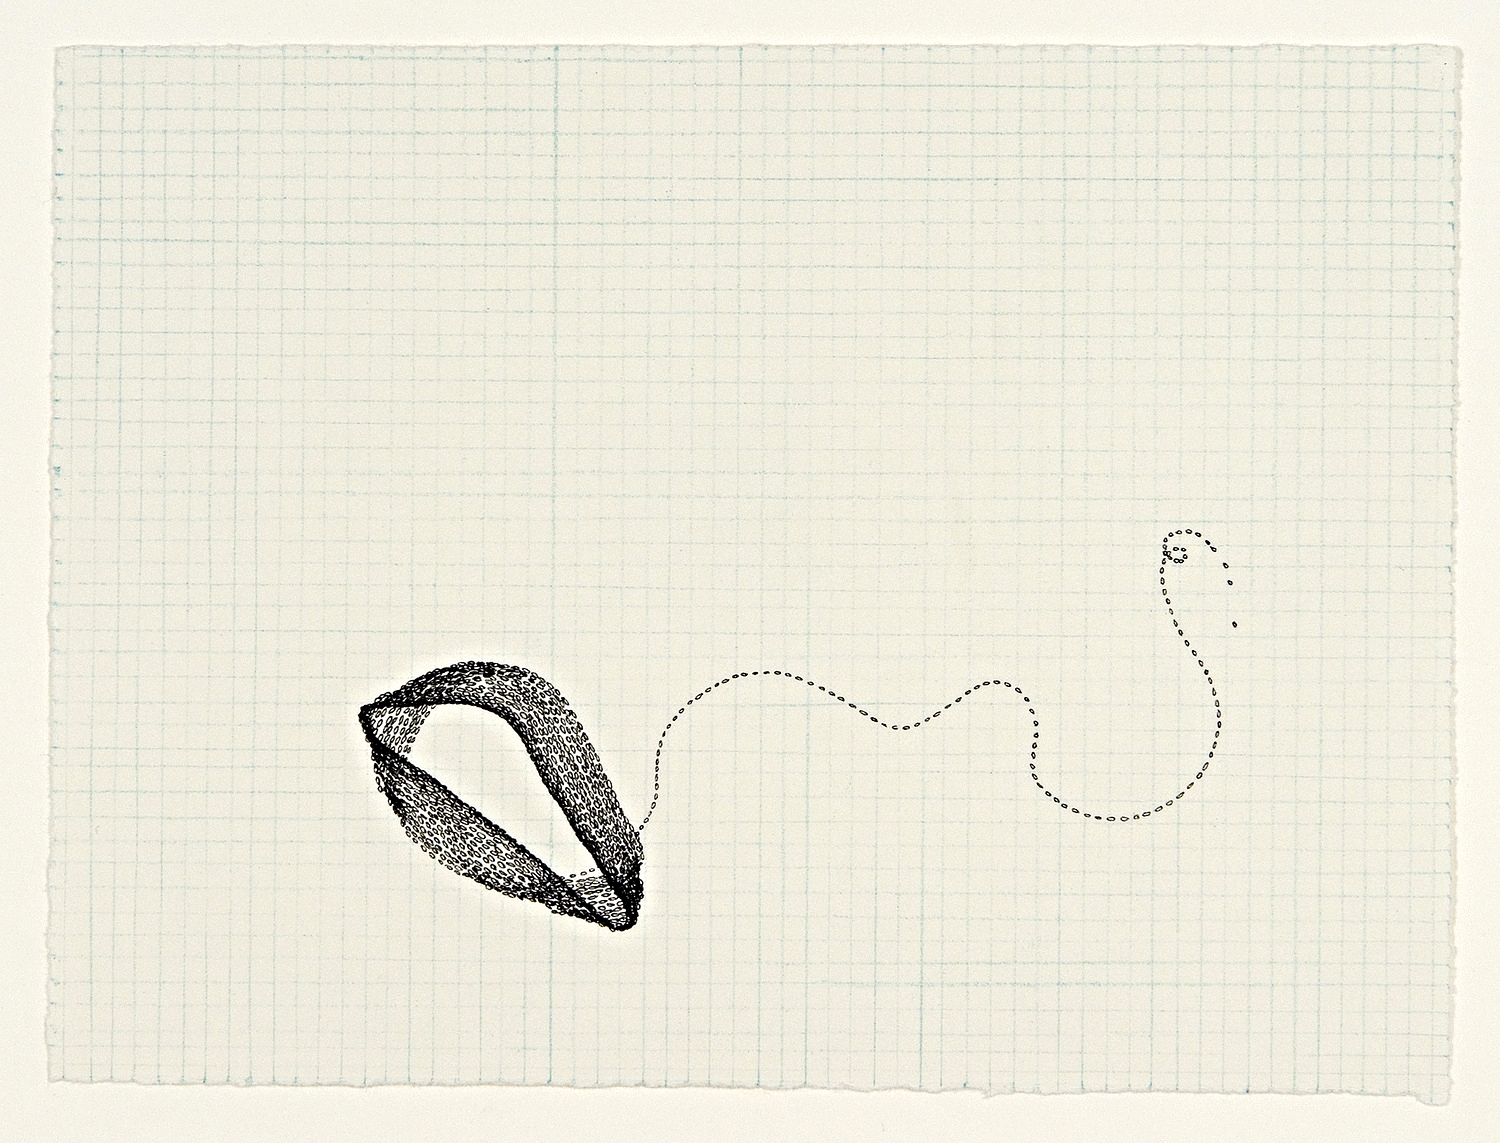 Holon # 9, 2007, ink and colored pencil on paper, 5 x 7 inches